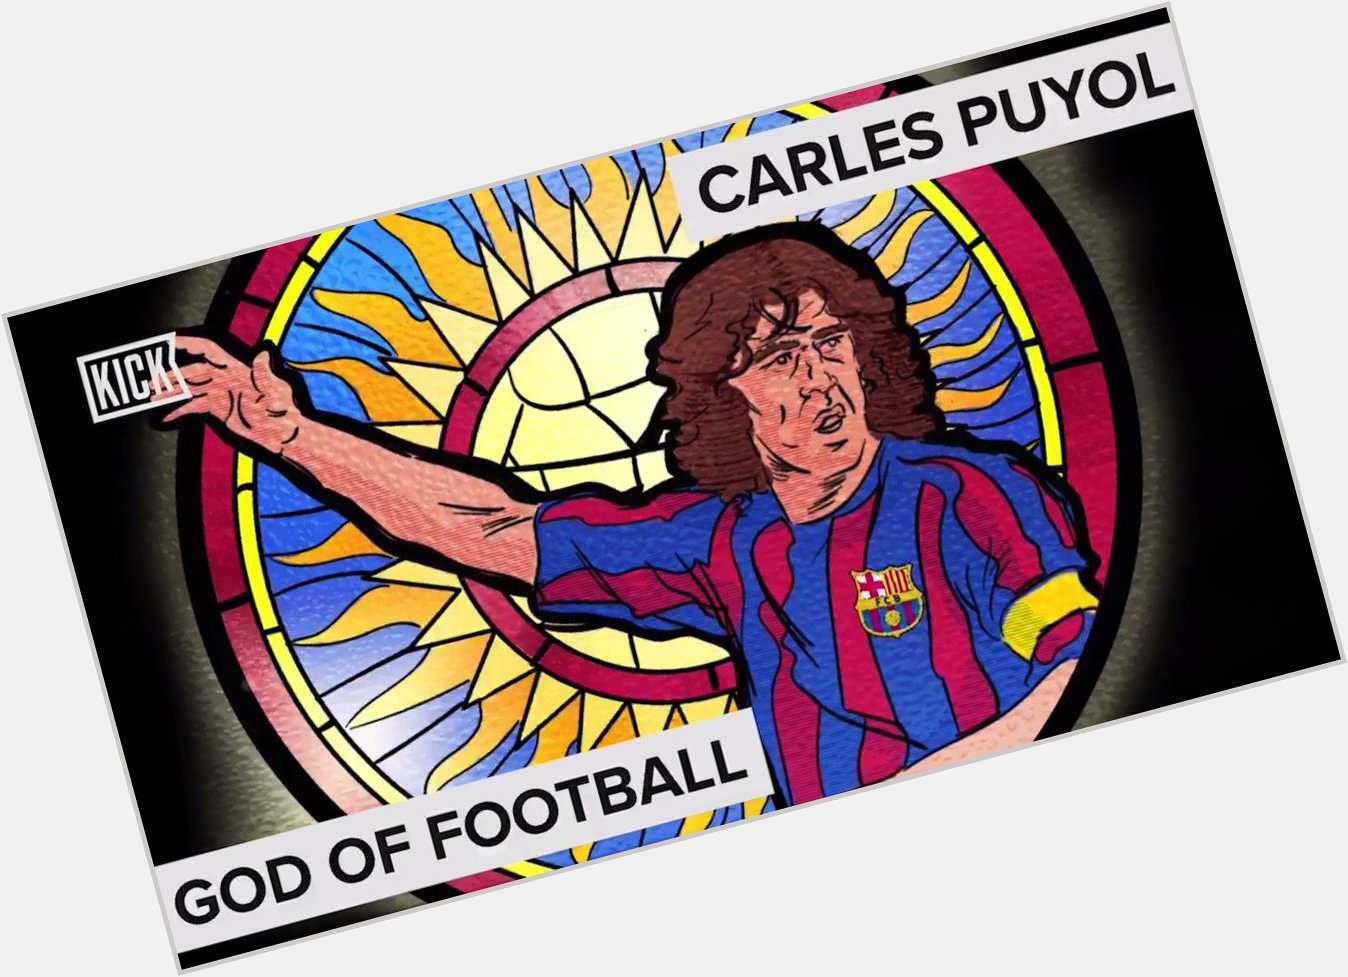 Happy Birthday to a true legend of the game, Carles Puyol! 